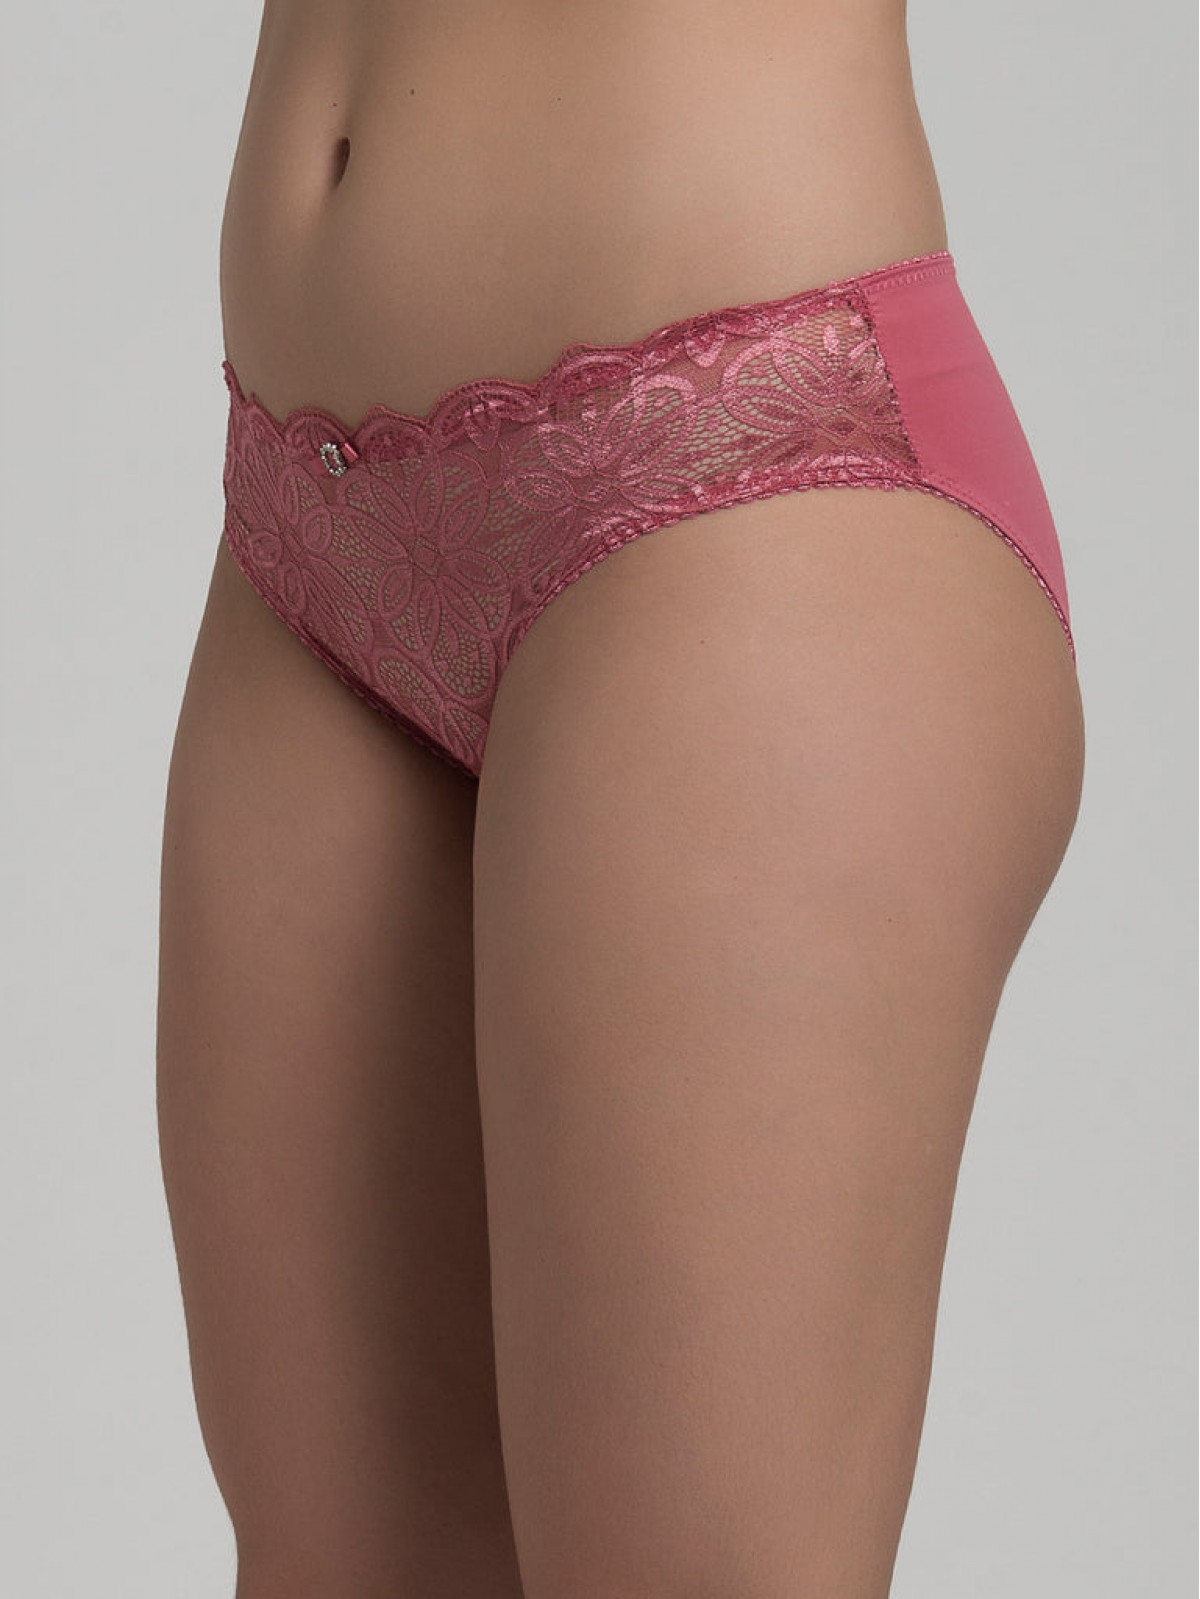 Lust in Sheer Lace Panty K3701P